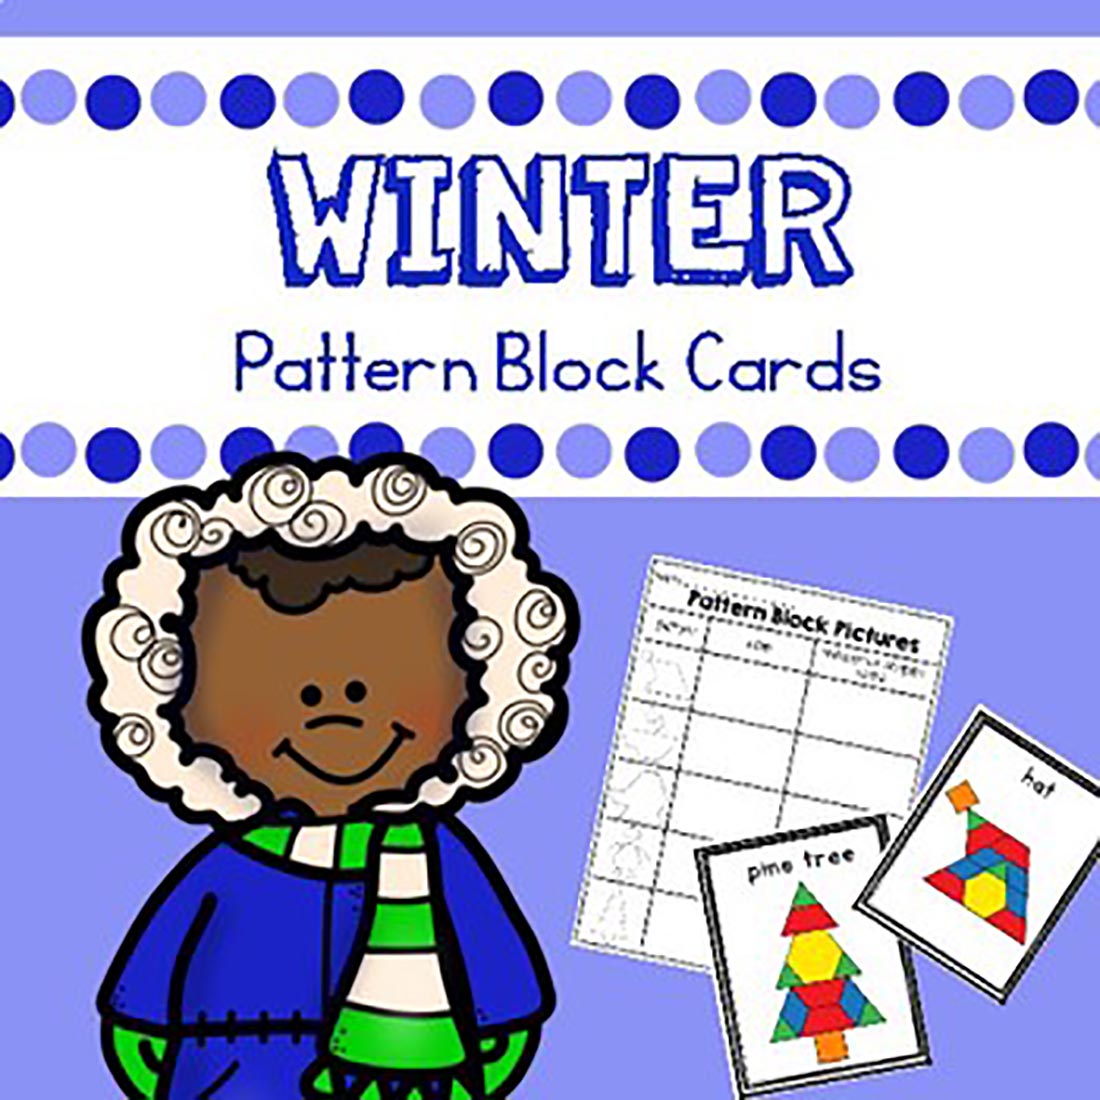 Winter Pattern Blocks Cards cover image.